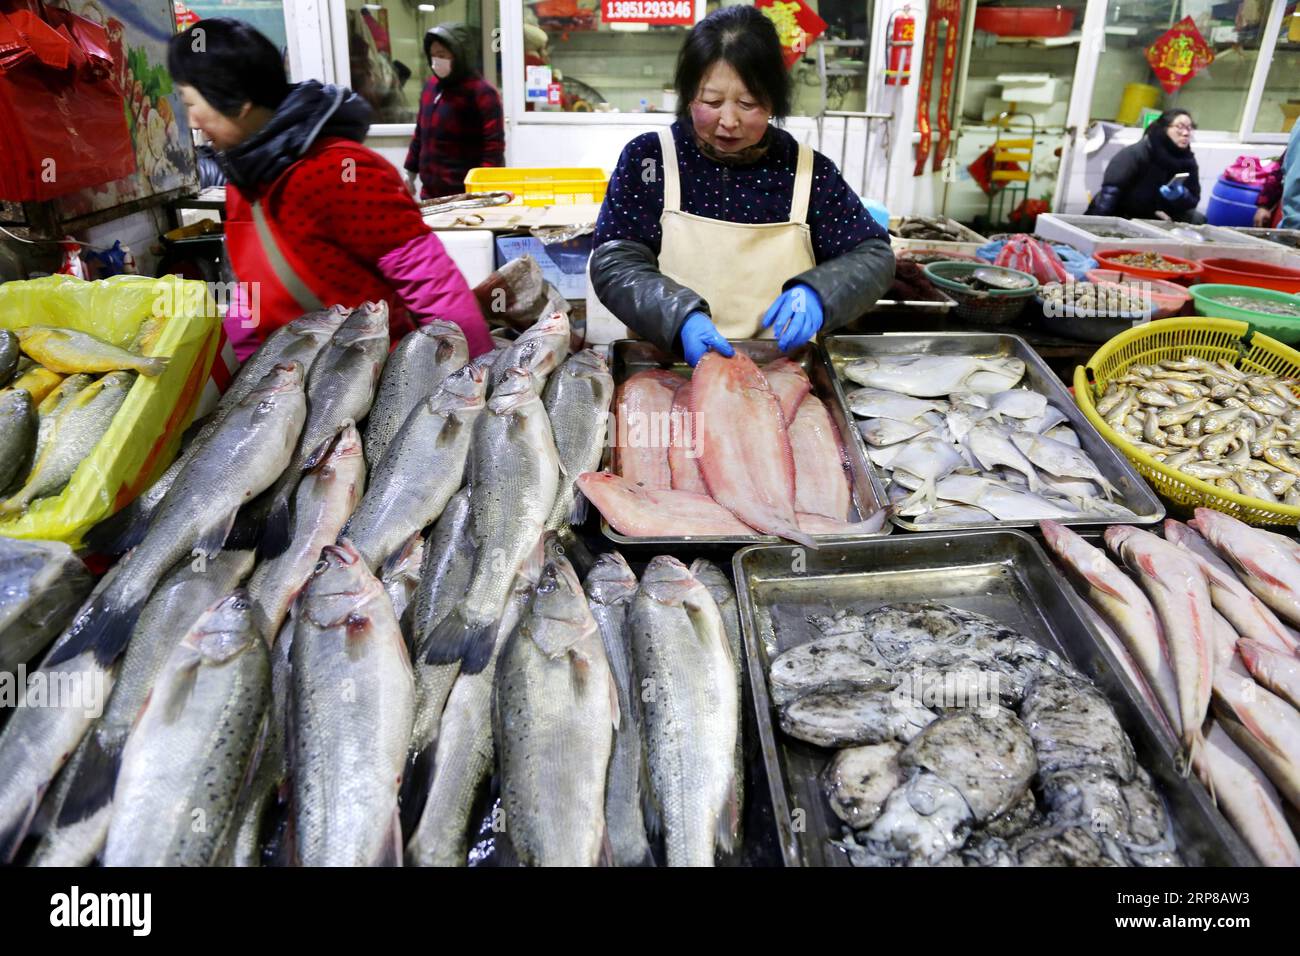 (190225) -- BEIJING, Feb. 25, 2019 -- A vender arranges sea food at a market in Lianyungang, east China s Jiangsu Province, Feb. 15, 2019. China has unveiled a guideline to enhance the accountability system of local governments to strengthen supervision over food safety. Food safety will be included in the performance assessment of the Party and government leading officials, according to the guideline released by the Central Committee of the Communist Party of China (CPC) and the State Council over the weekend. The guideline aims to promote local government s food safety work and improve peopl Stock Photo